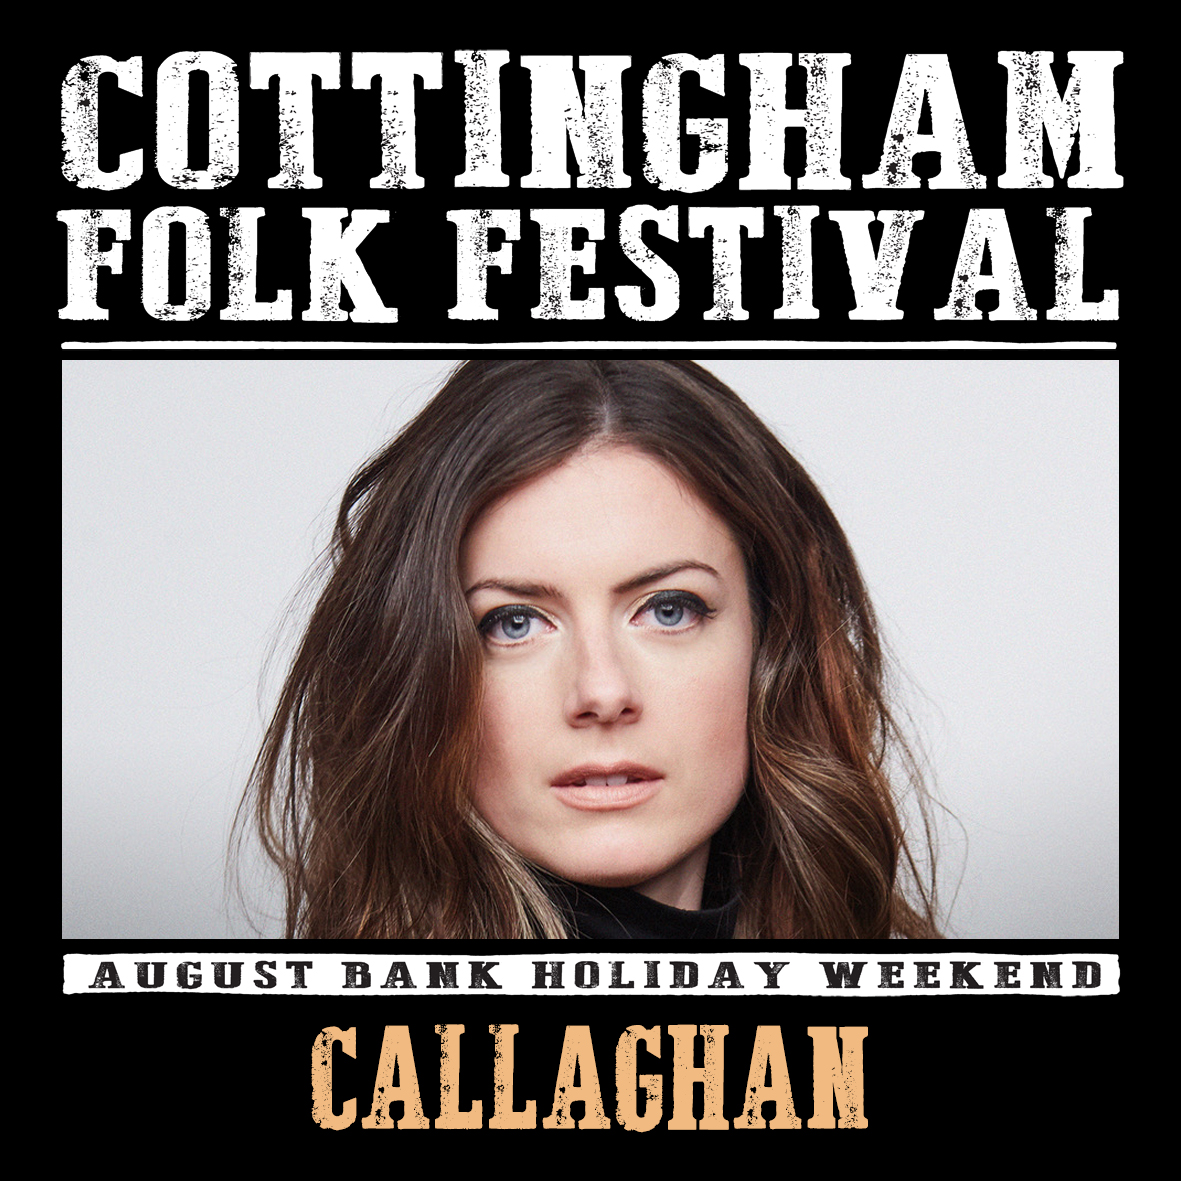 Best known for her Shawn Mullins produced album 'Life in Full Colour', Callaghan offers a stunning voice, earning comparisons with Sarah McLachlan, Eva Cassidy and Carly Simon. Her songwriting chronicles the stories, experiences and emotions which are part of everyone’s lives.